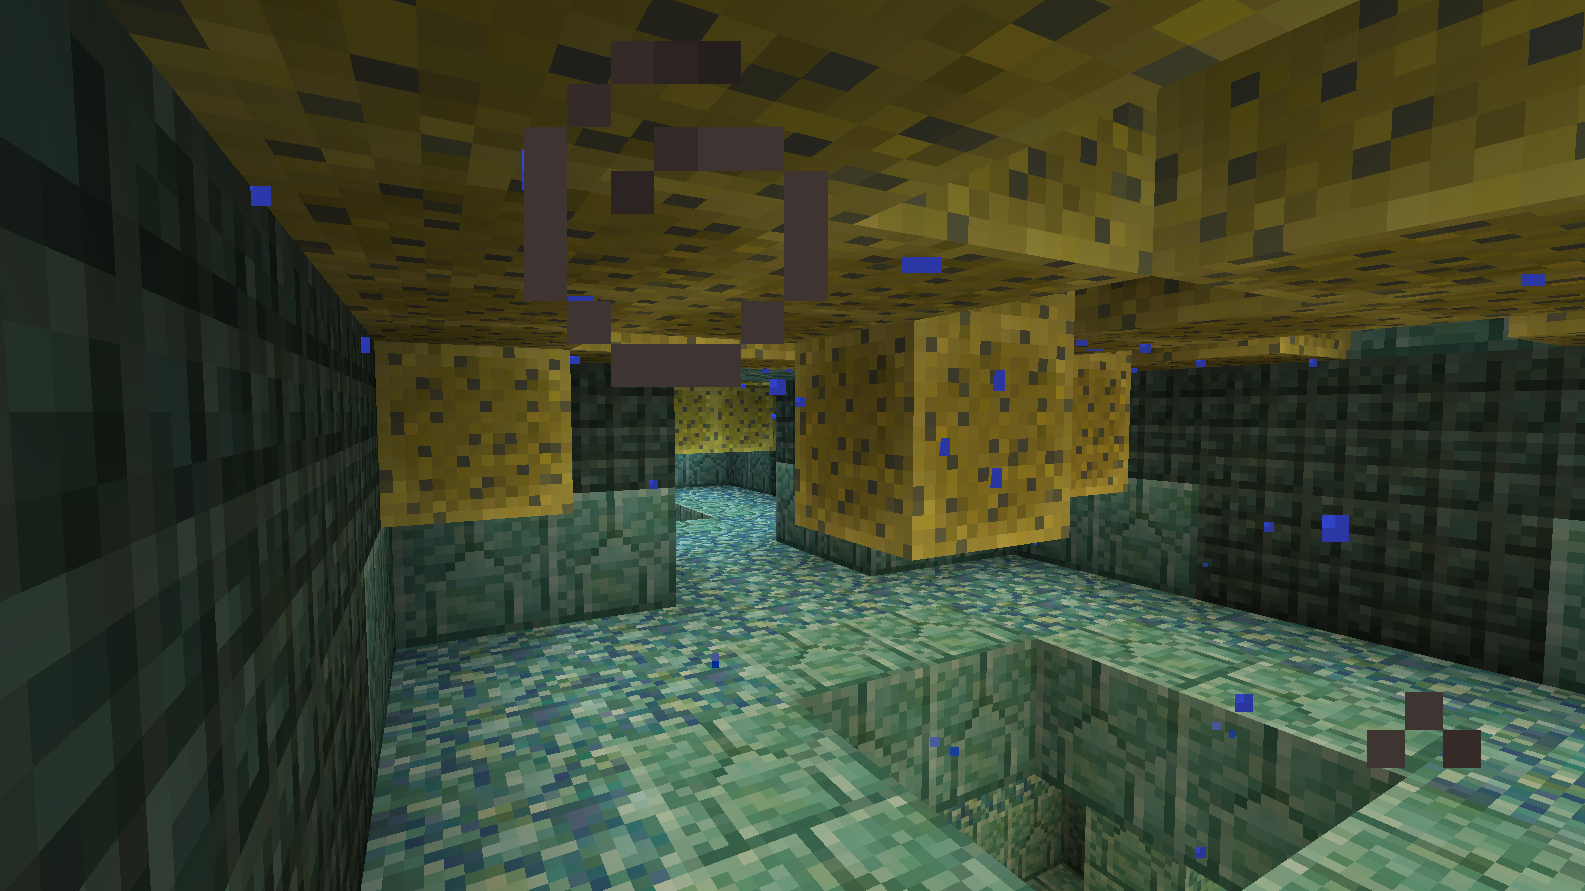 We got some "sponge rooms" on the temple too. : Minecraft